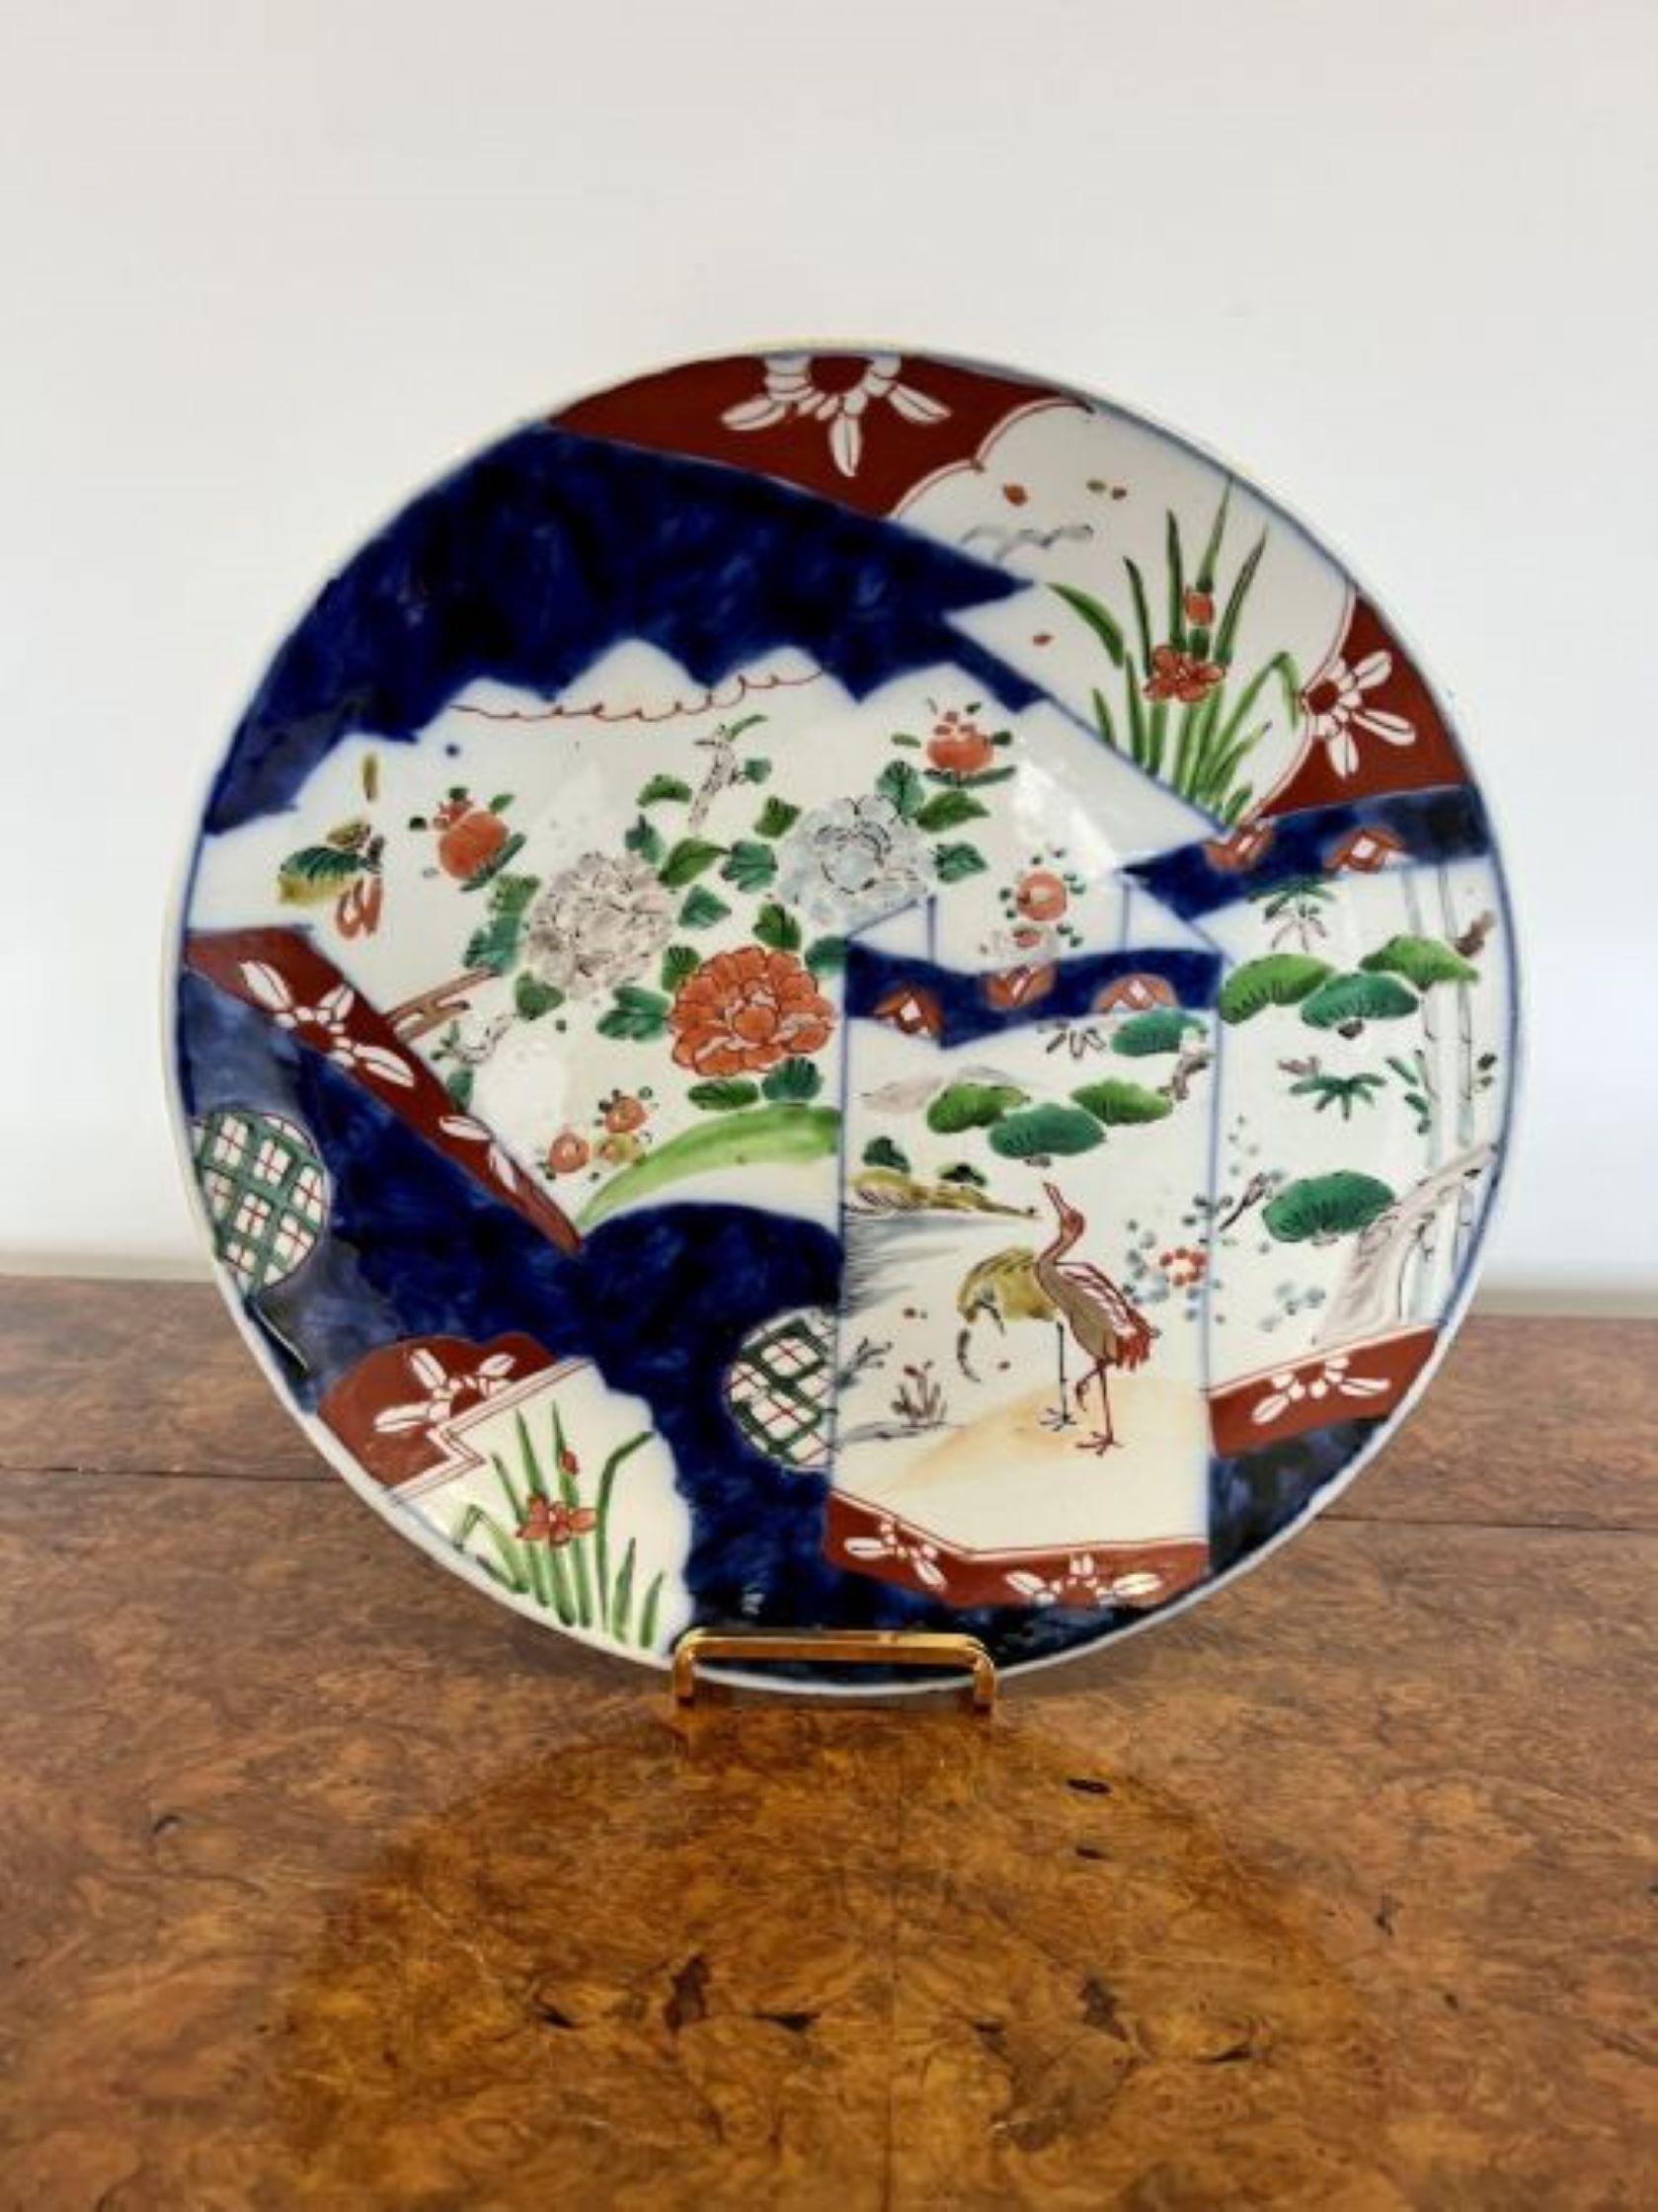 Quality antique Japanese Imari plate having a quality antique Japanese Imari plate decorated with birds and flowers hand painted in vibrant red, green, blue and white colours. 